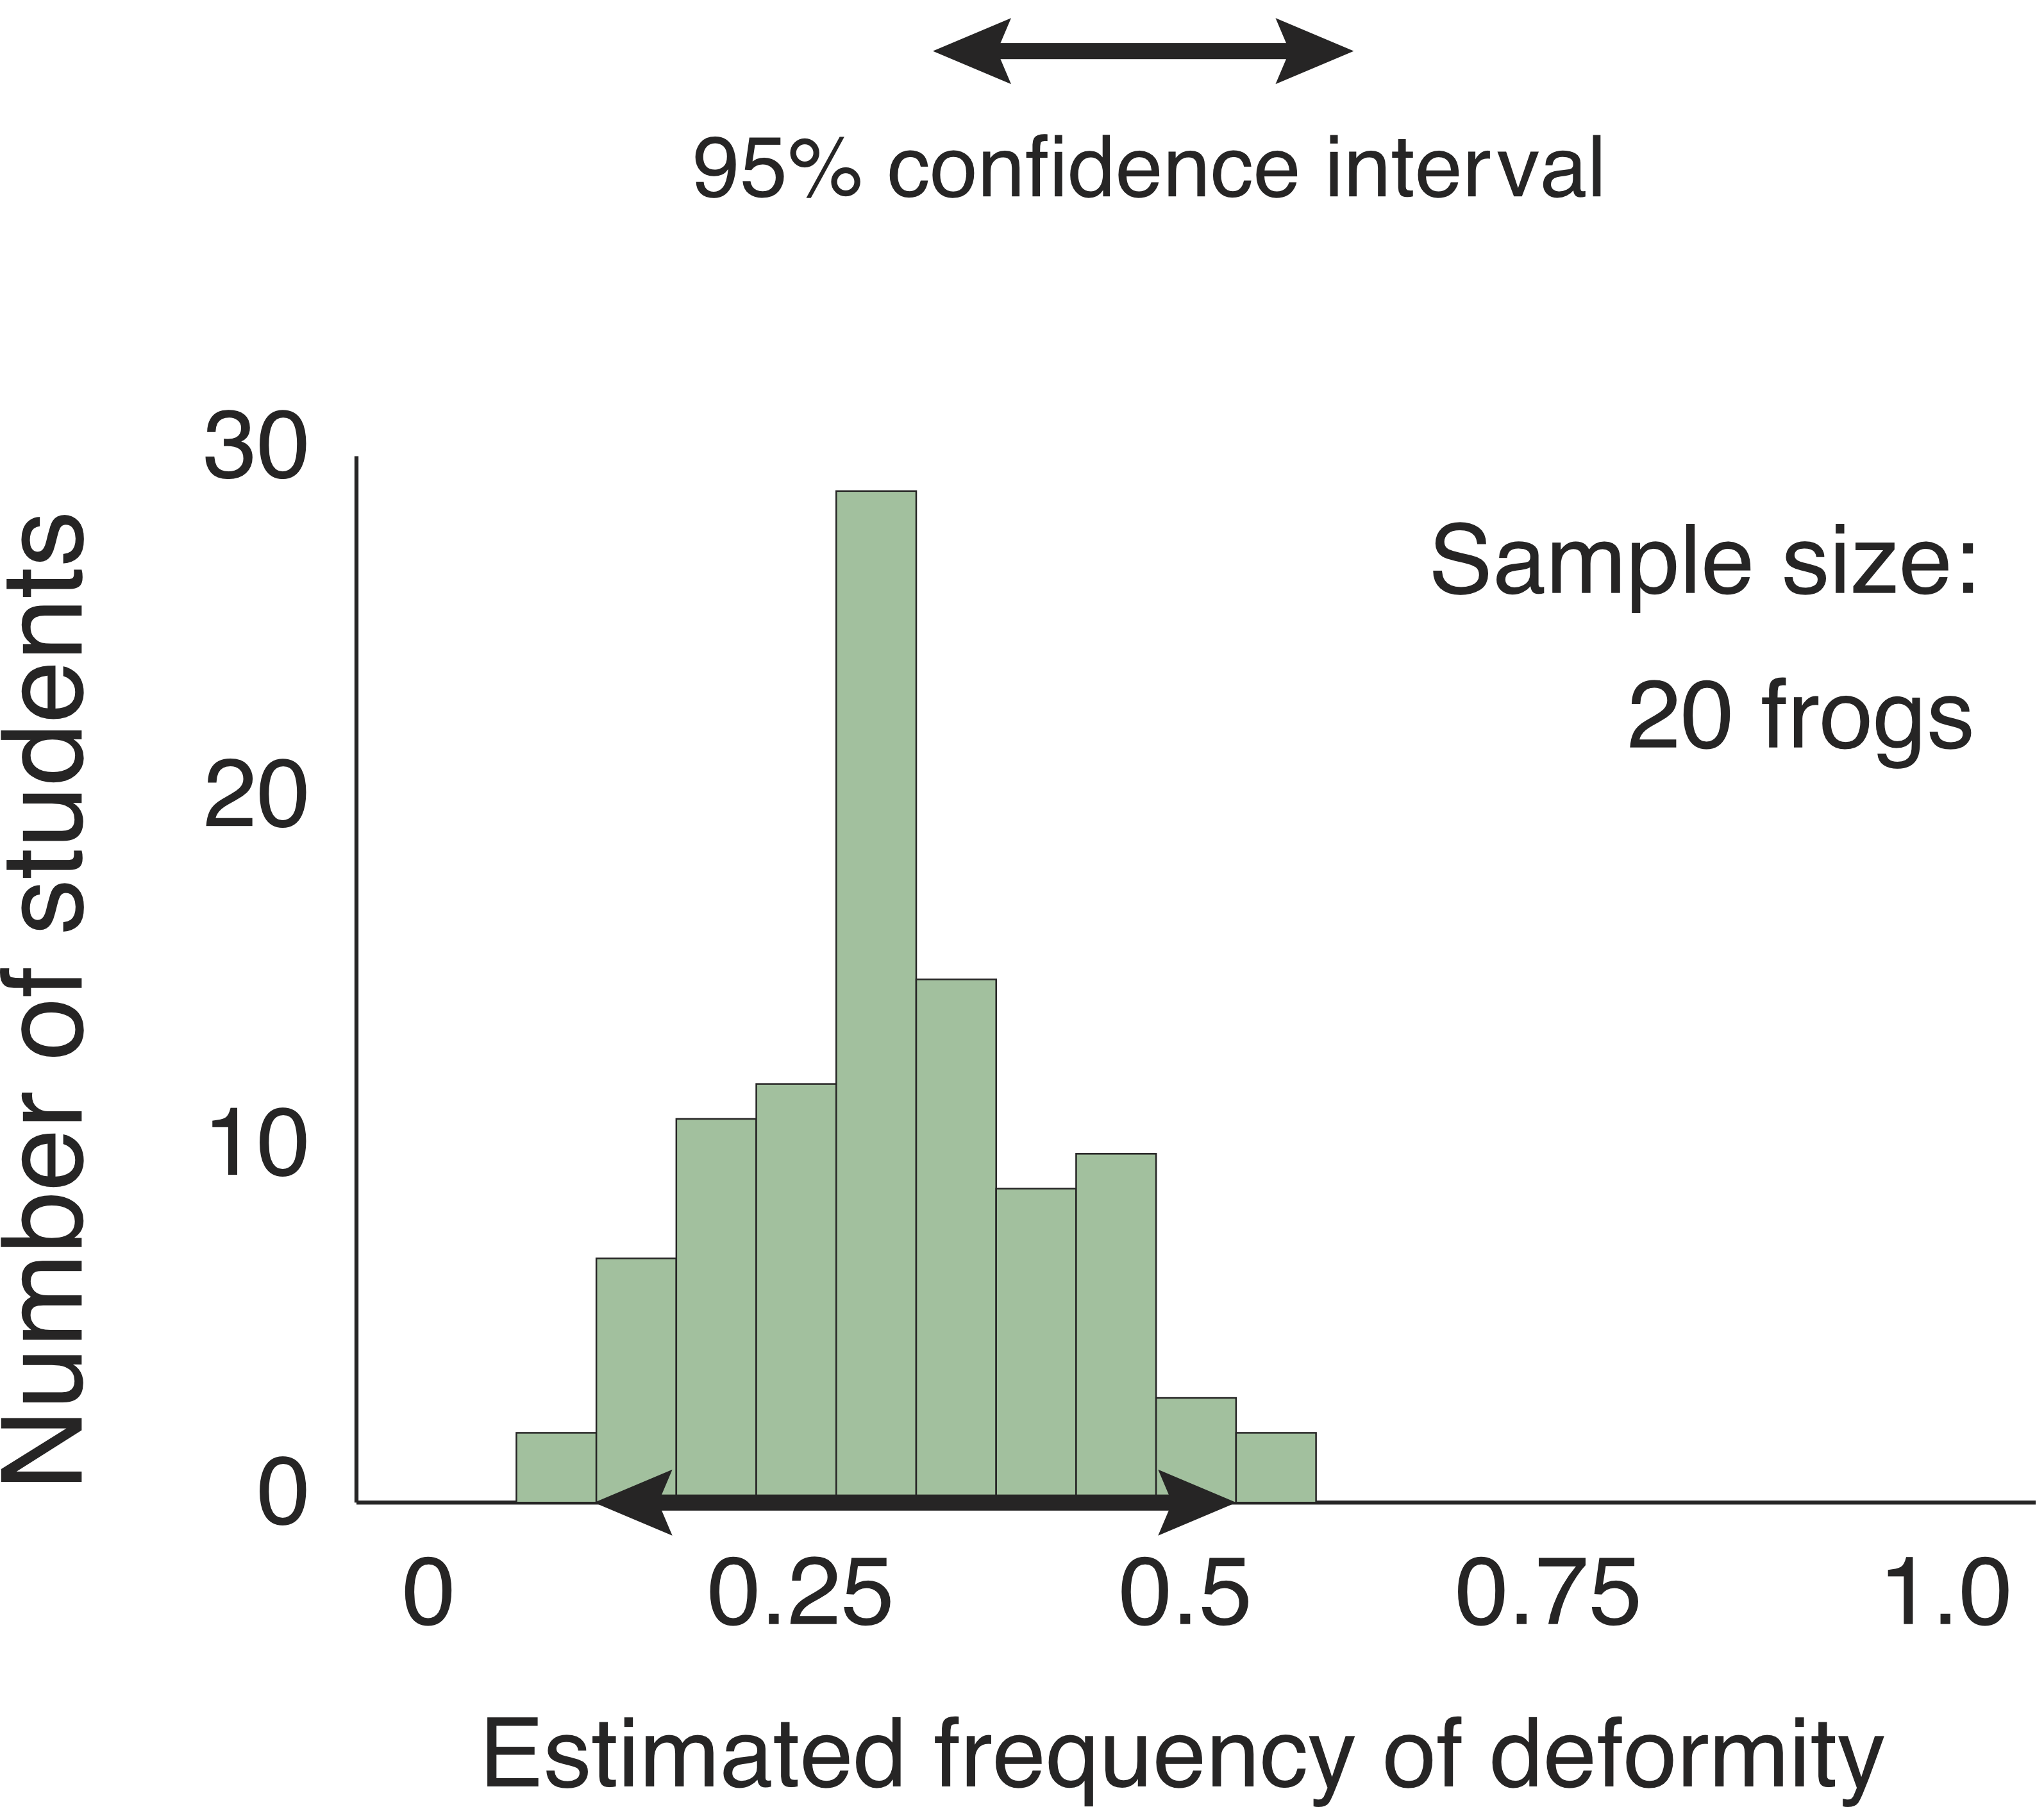 Histogram, labeled Sample size: 20 frogs. Vertical axis is Number of students, ranging from 0 to 30. Horizontal axis is Estimated frequency of deformity, ranging from 0 to 1. The bars show that most estimates were in the ballpark of 30%, but ranged from 5% to 55%. A key indicates that the double headed black arrow on the horiztonal axis represents the 95% confidence interval. It ranges from 15% to 50%.